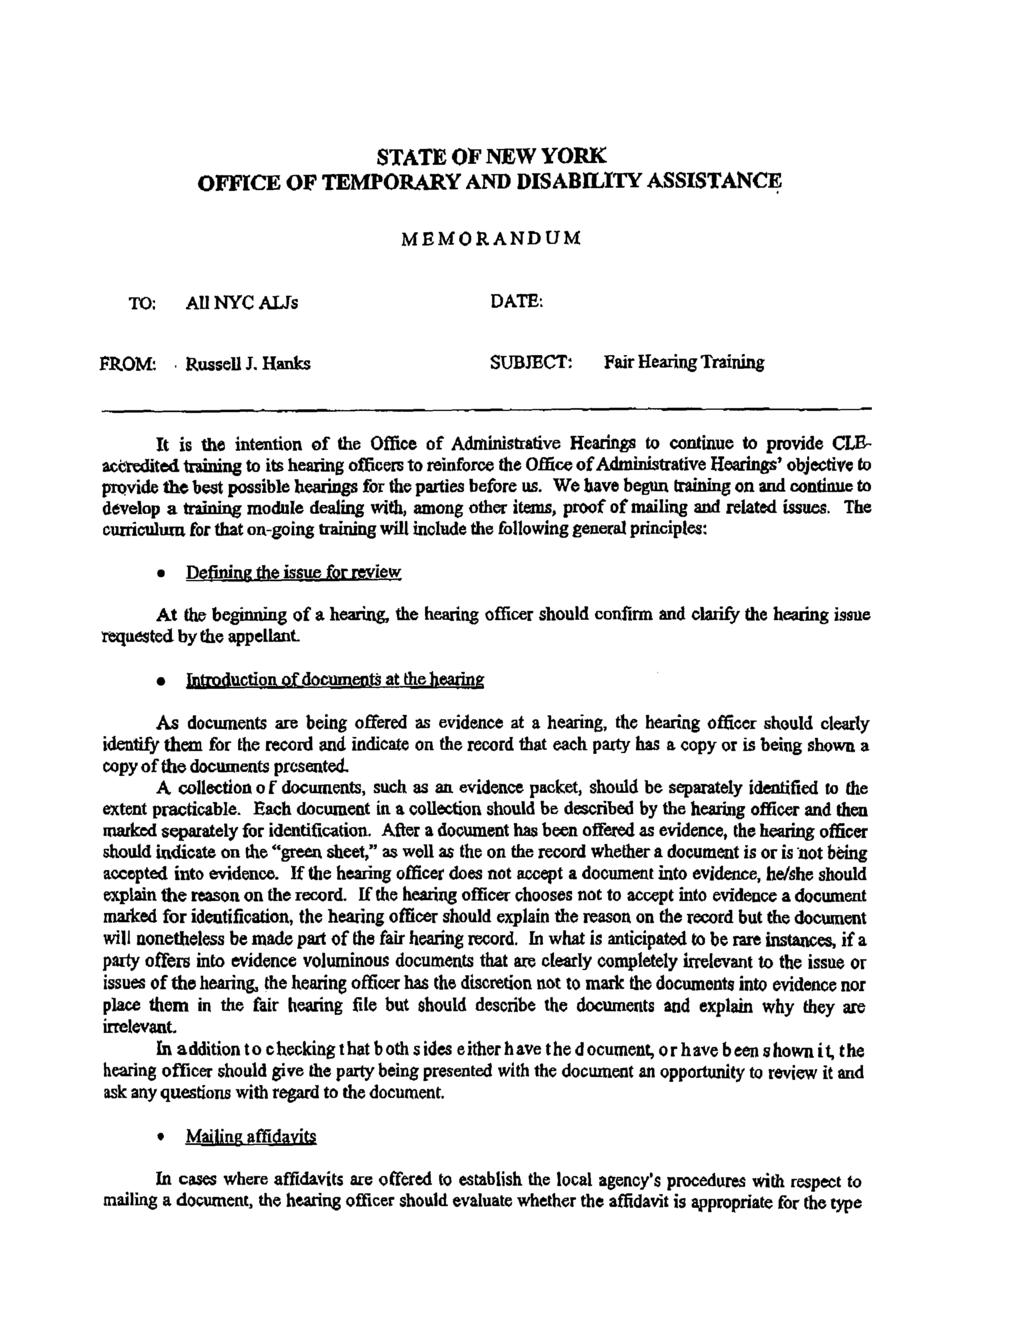 STATE OF NEW YORK OFFICE OF TEMPORARY AND DISABILITY ASSISTAN~ MEMOR.ANDUM TO: All NYC ALIs DATE: FR.OM:,Russell J.